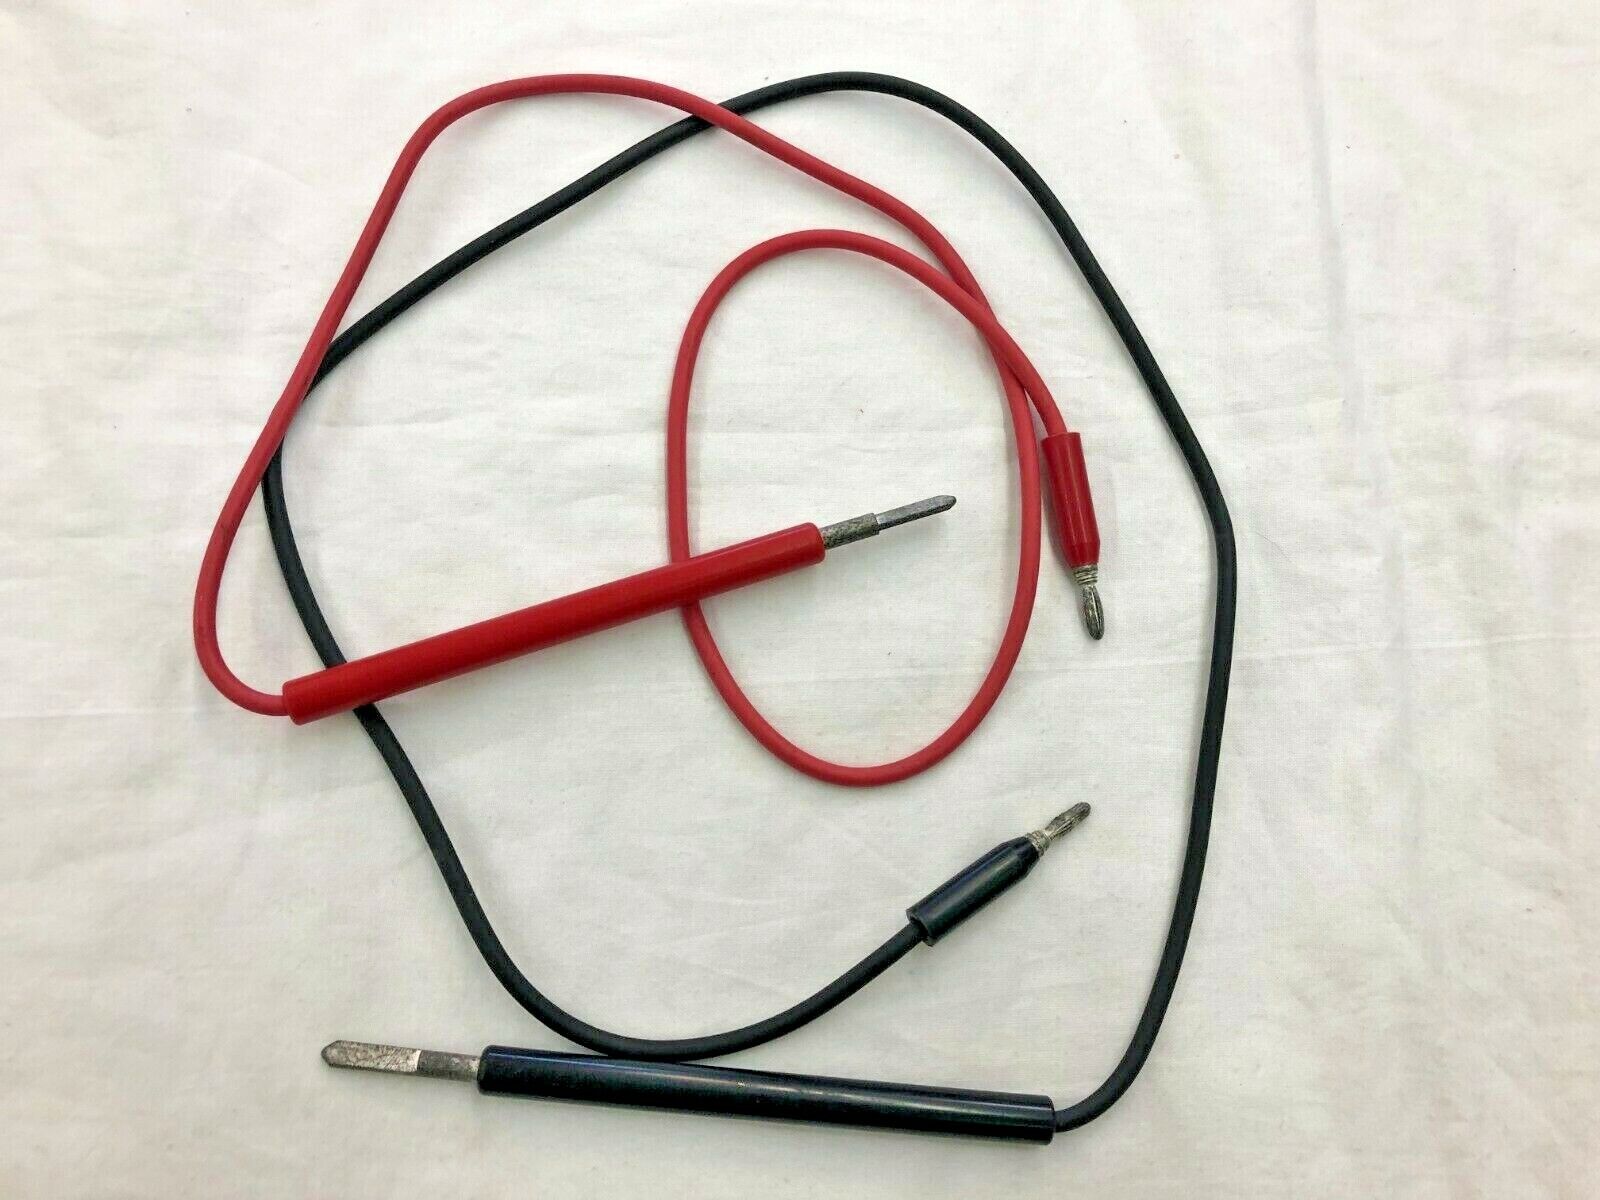 Pair of service Generic Probes Red and Banana Black 5 ☆ popular Clip #11 Bag